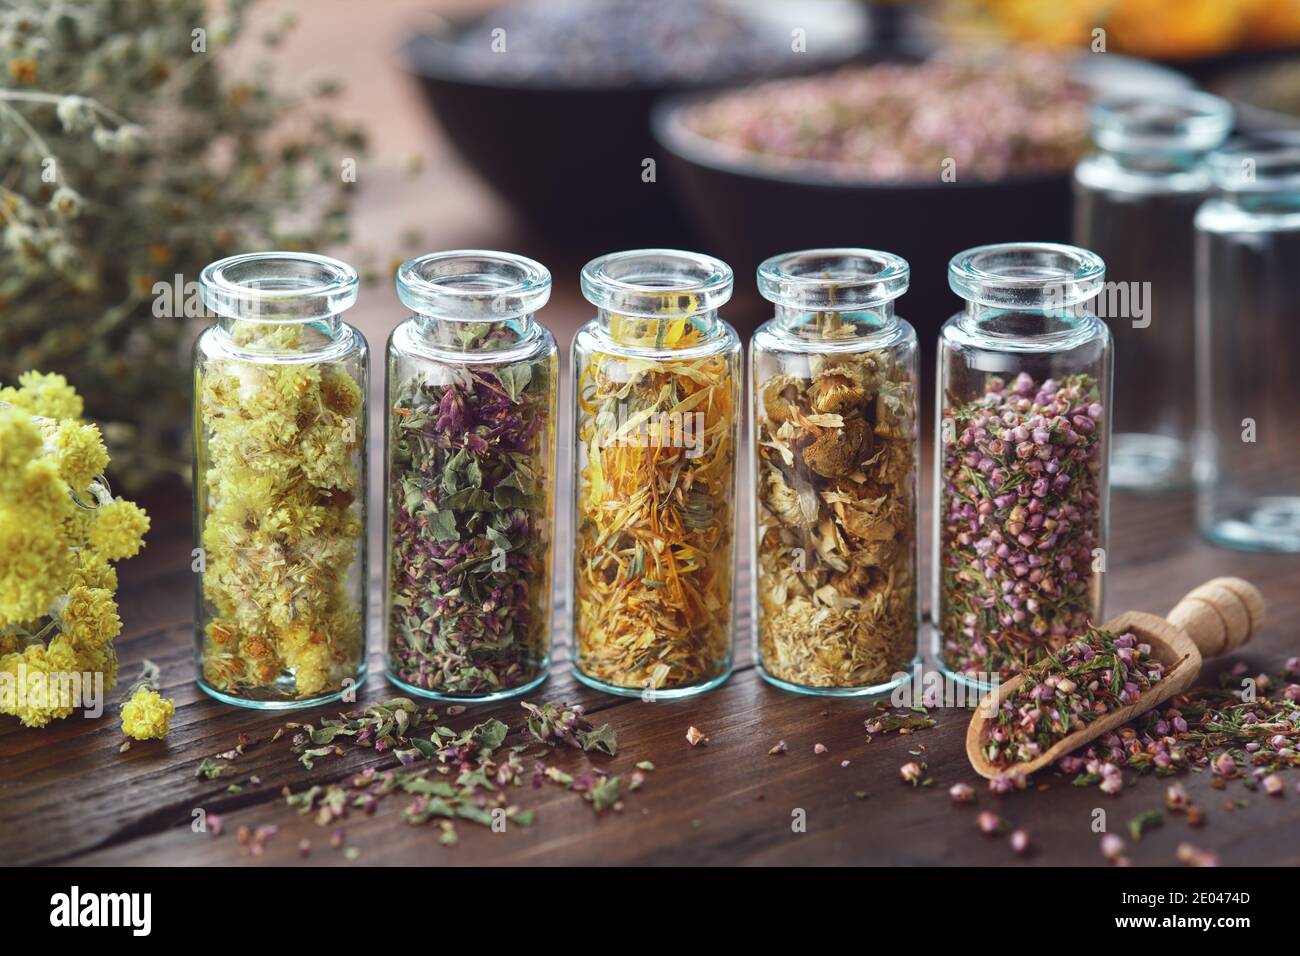 Glass bottles of medicinal herbs - helichrysum, wild marjoram; calendula, daisies, heather,  bunches of dry plants, bowls of herbs on background. Alte Stock Photo